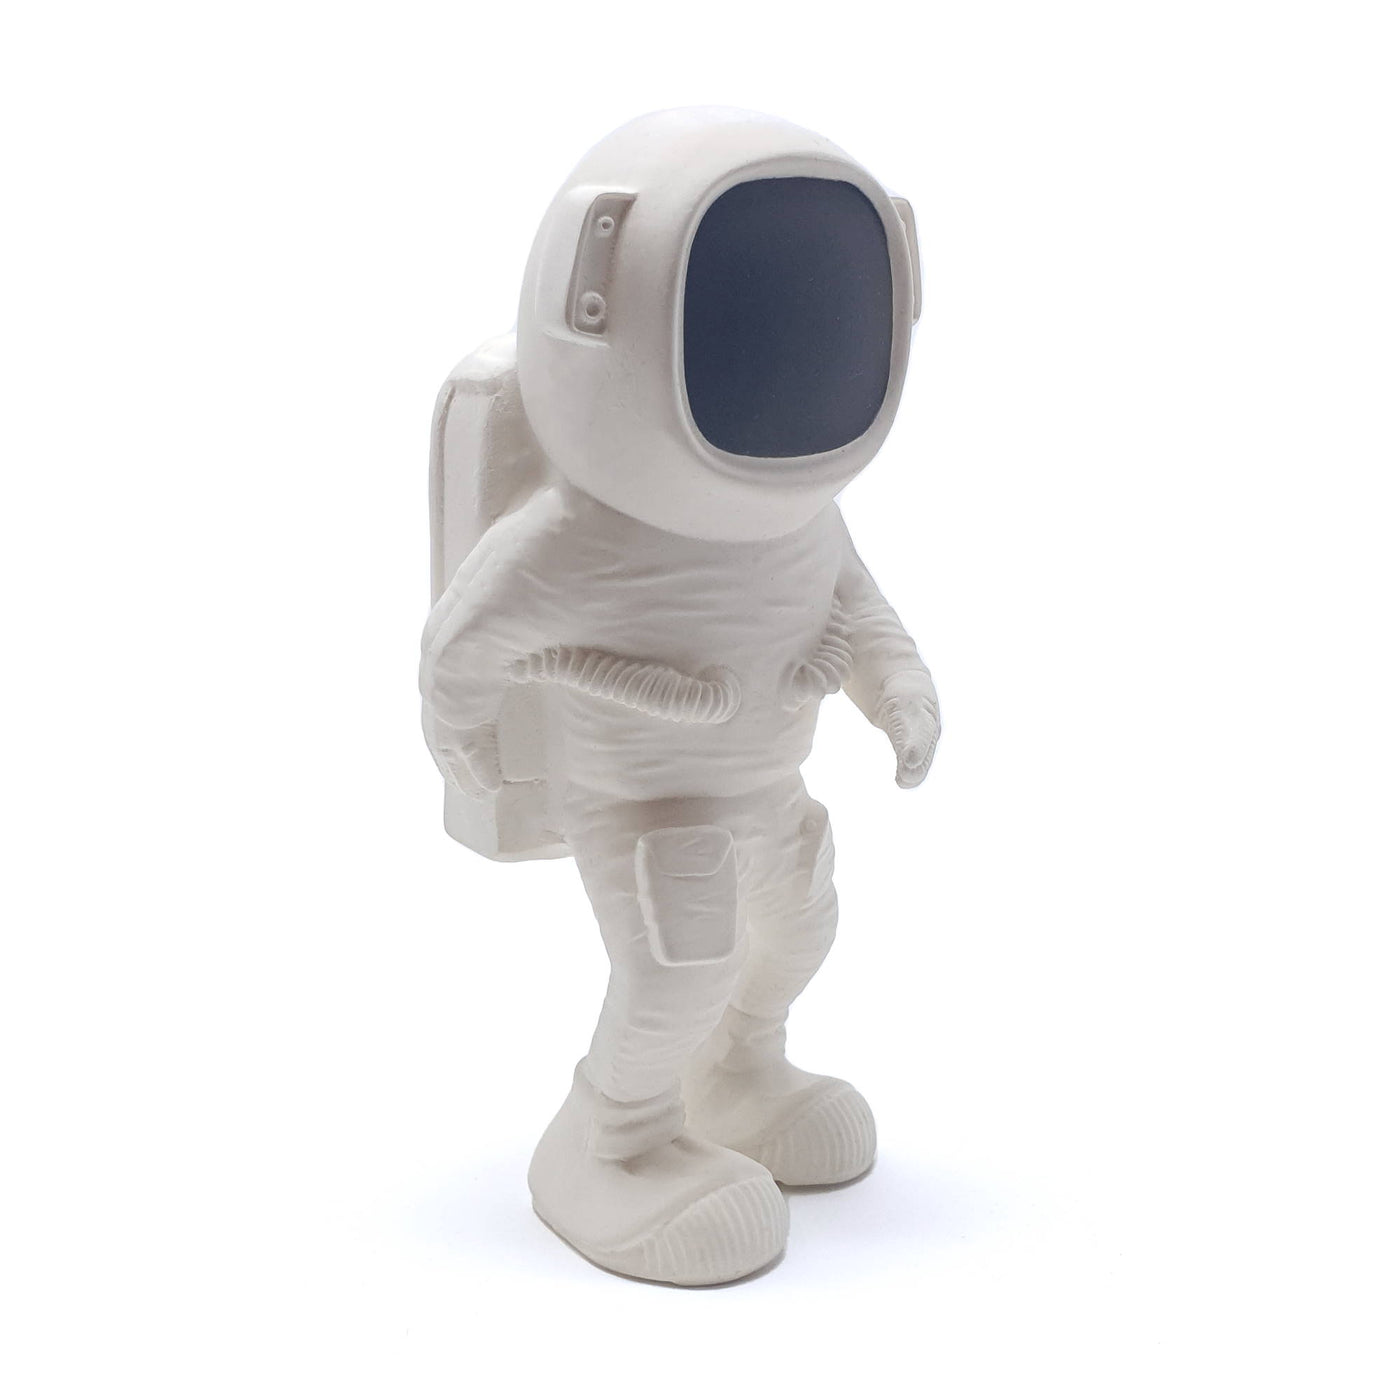 White astronaut AstroGNAW baby bathtub toy for water play